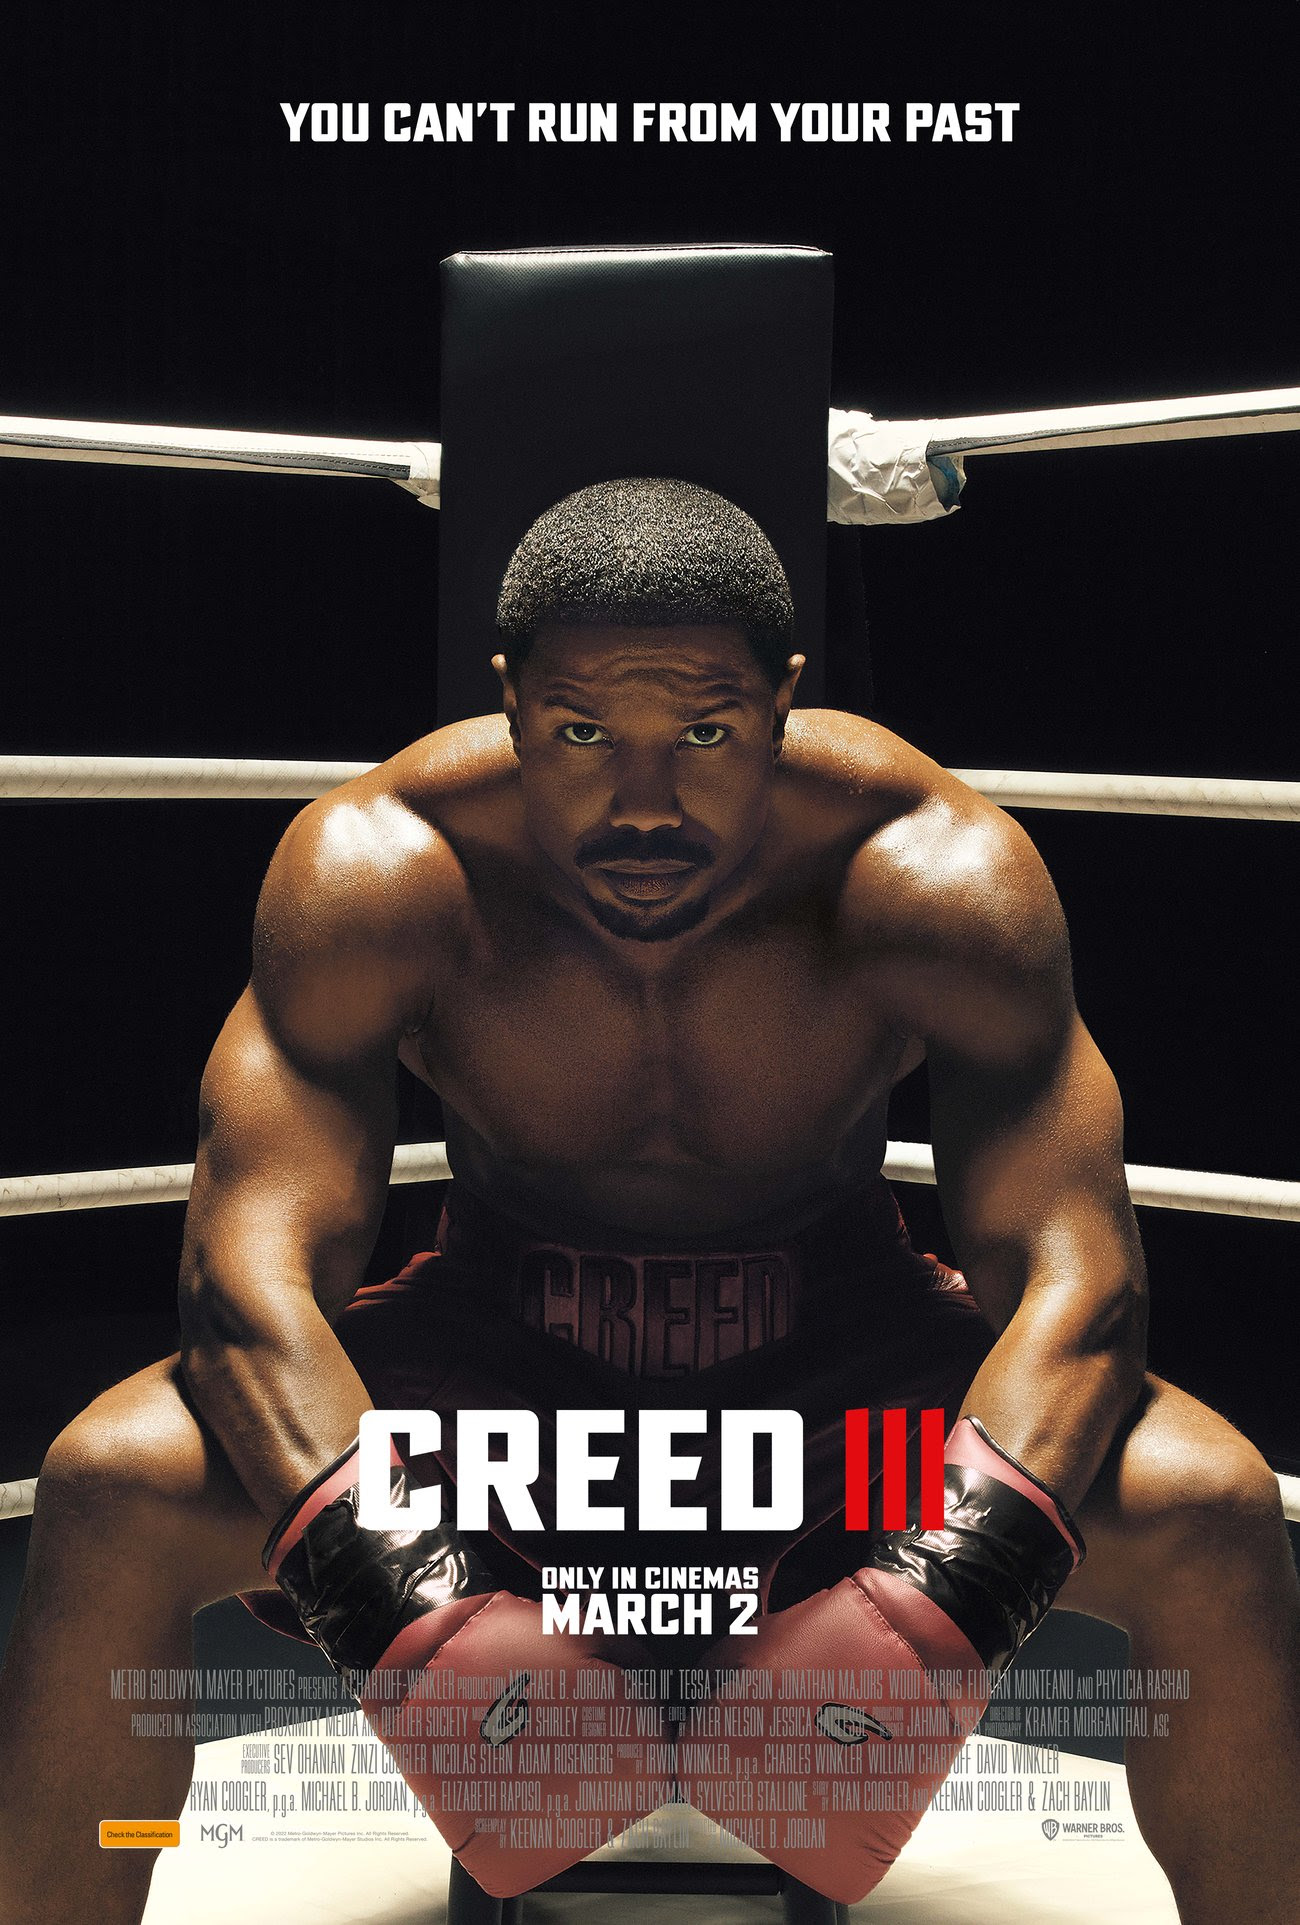 creed 3 movie review embargo